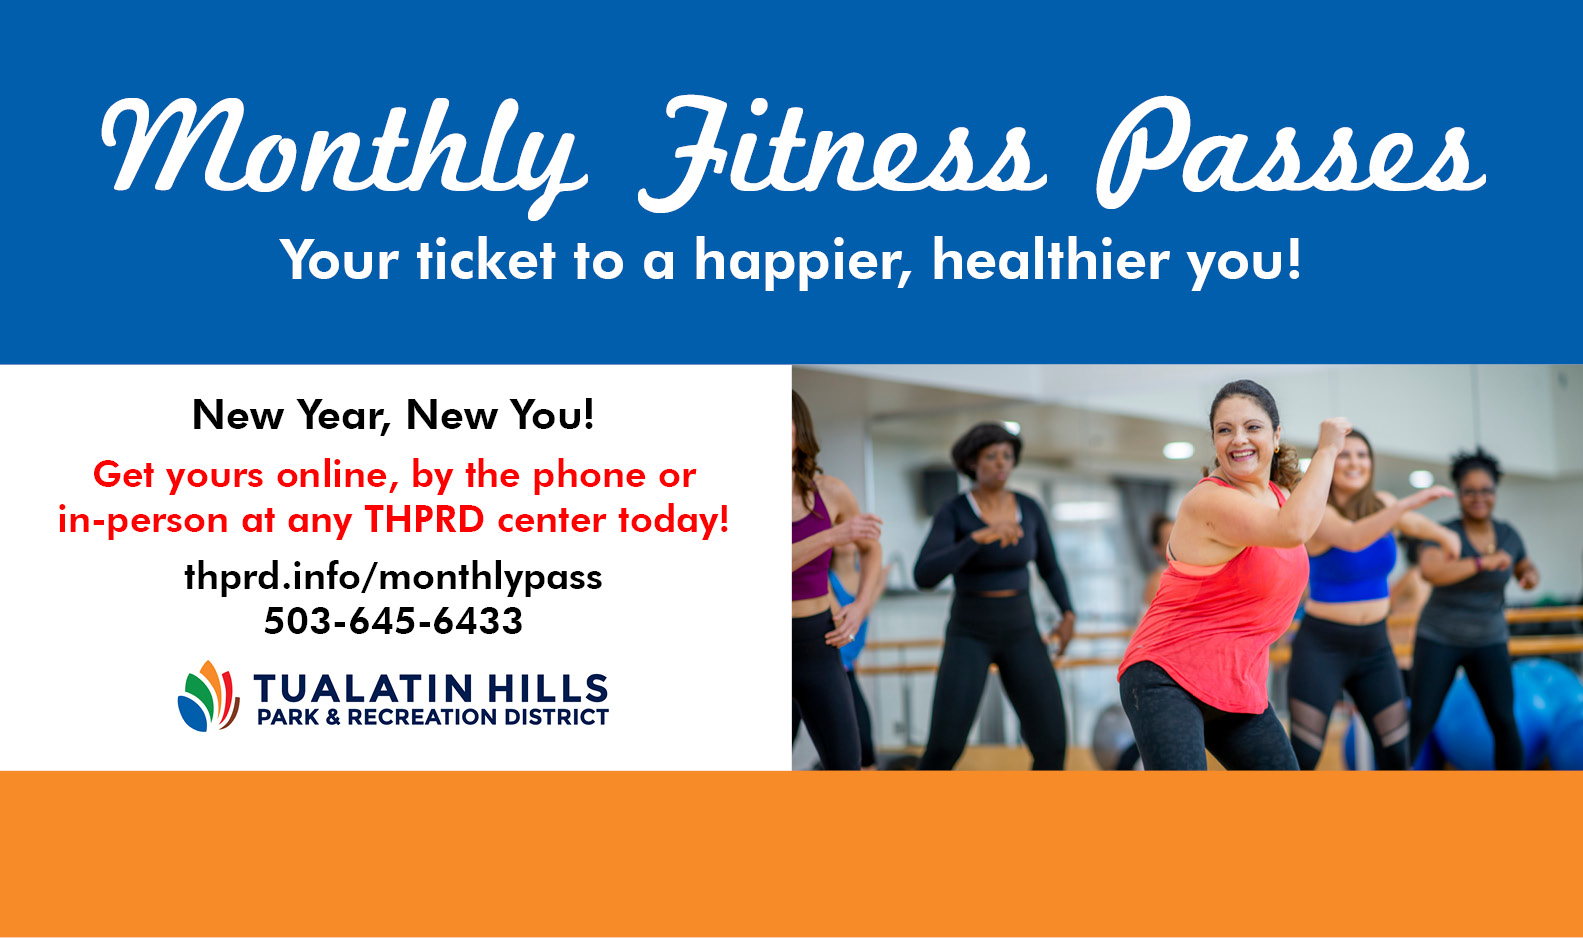 Monthly Fitness Passes - Available for Purchase